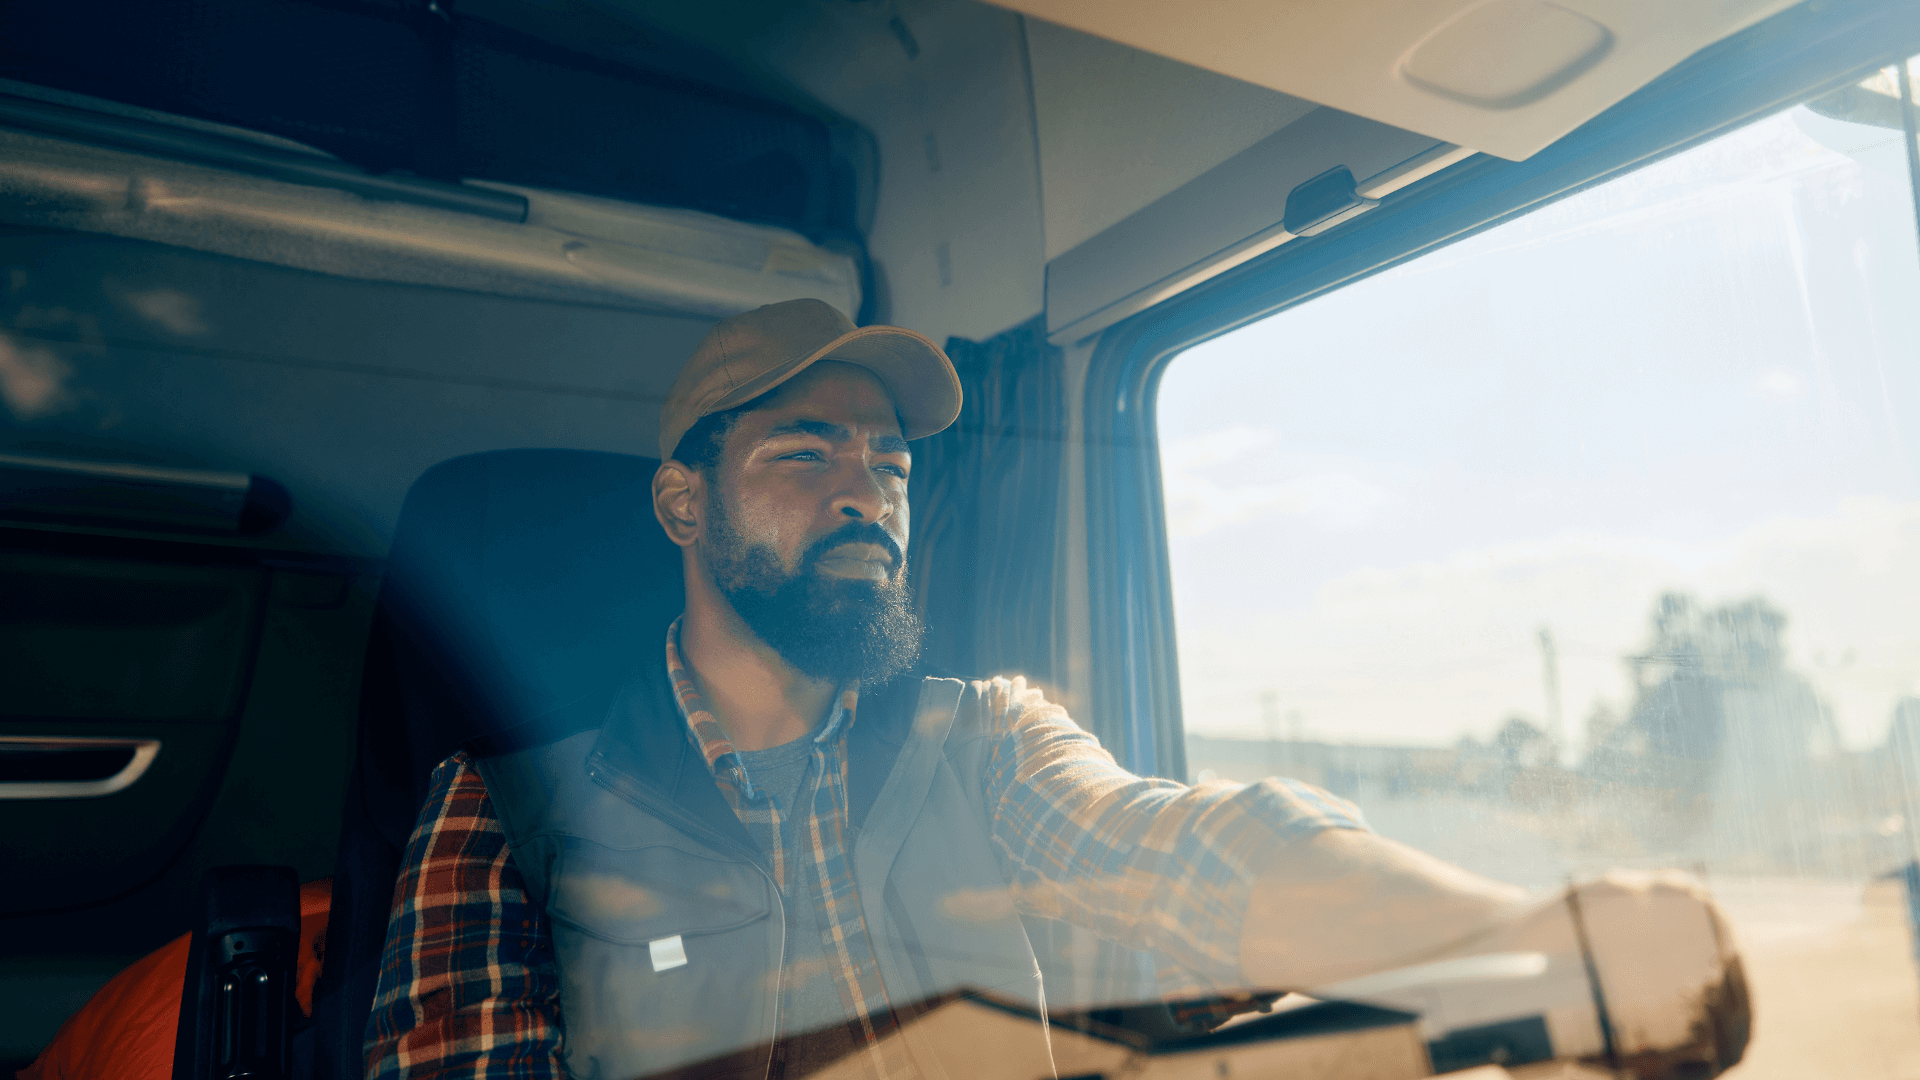 Emergency Truck Repair: What to Do When You're Stranded on the Road